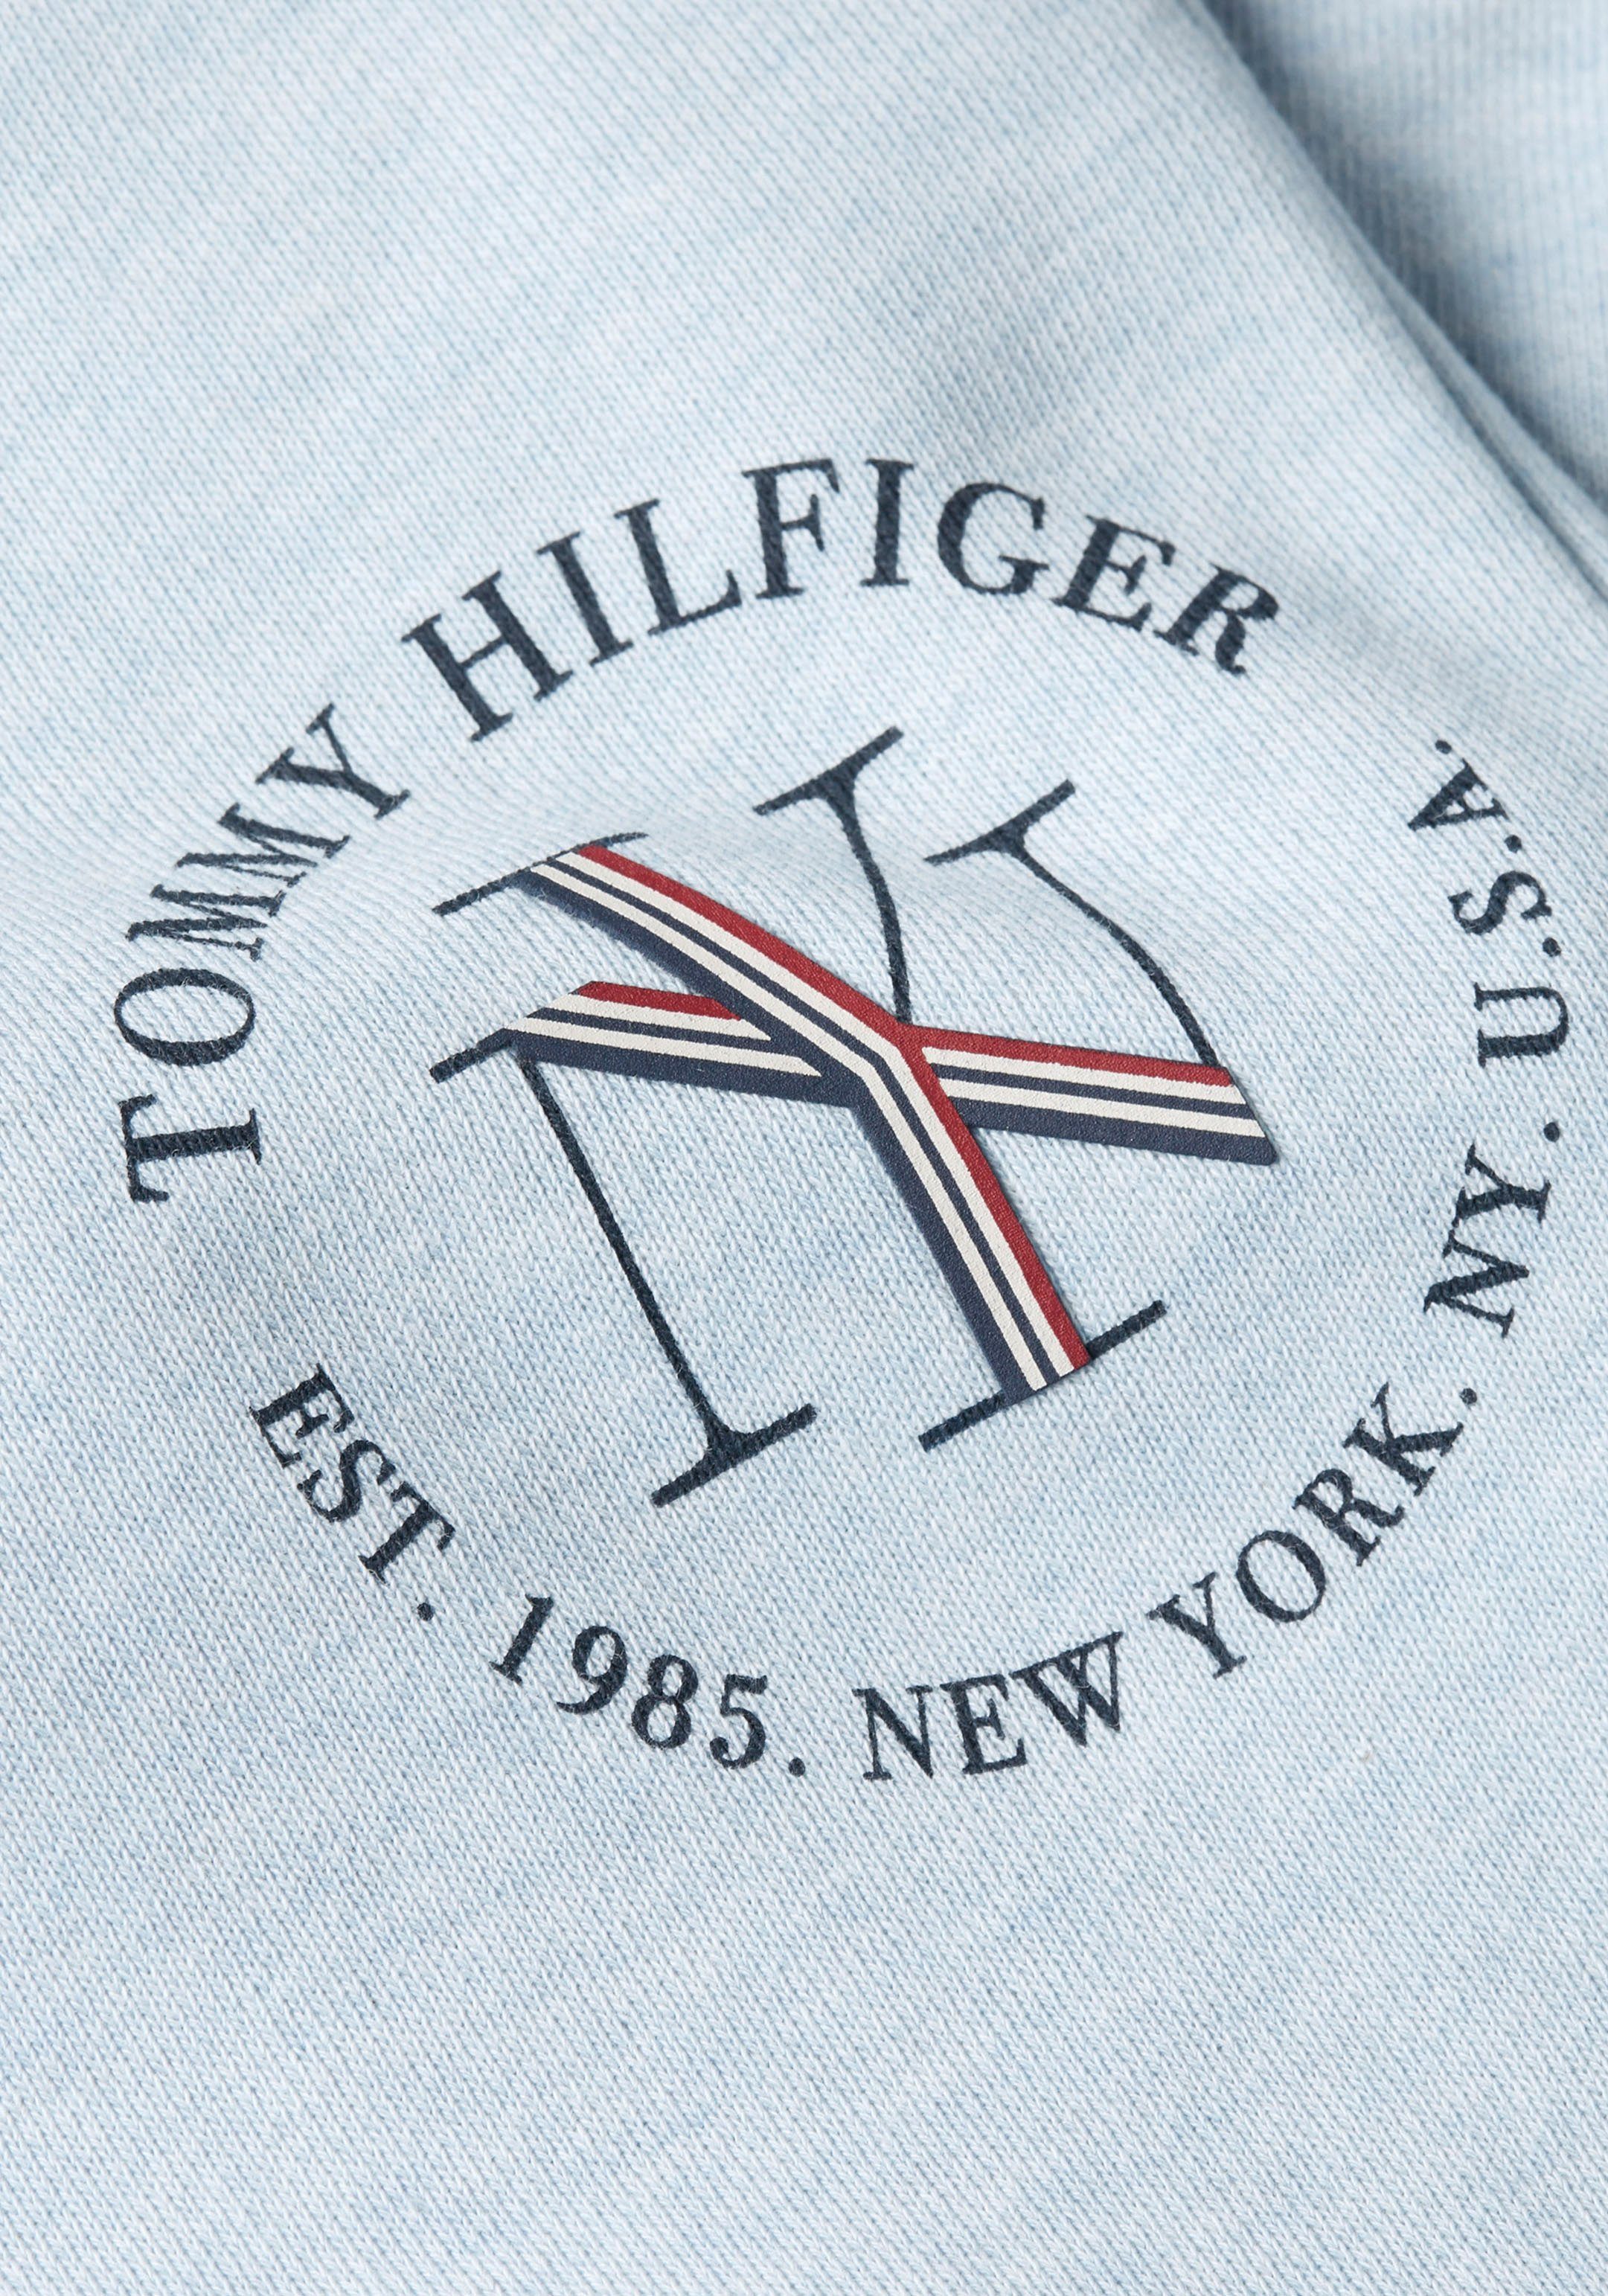 Tommy SWEATPANTS Hilfiger Hilfiger TAPERED Markenlabel Tommy Sweatpants mit ROUNDALL Breezy-Blue-Heather NYC